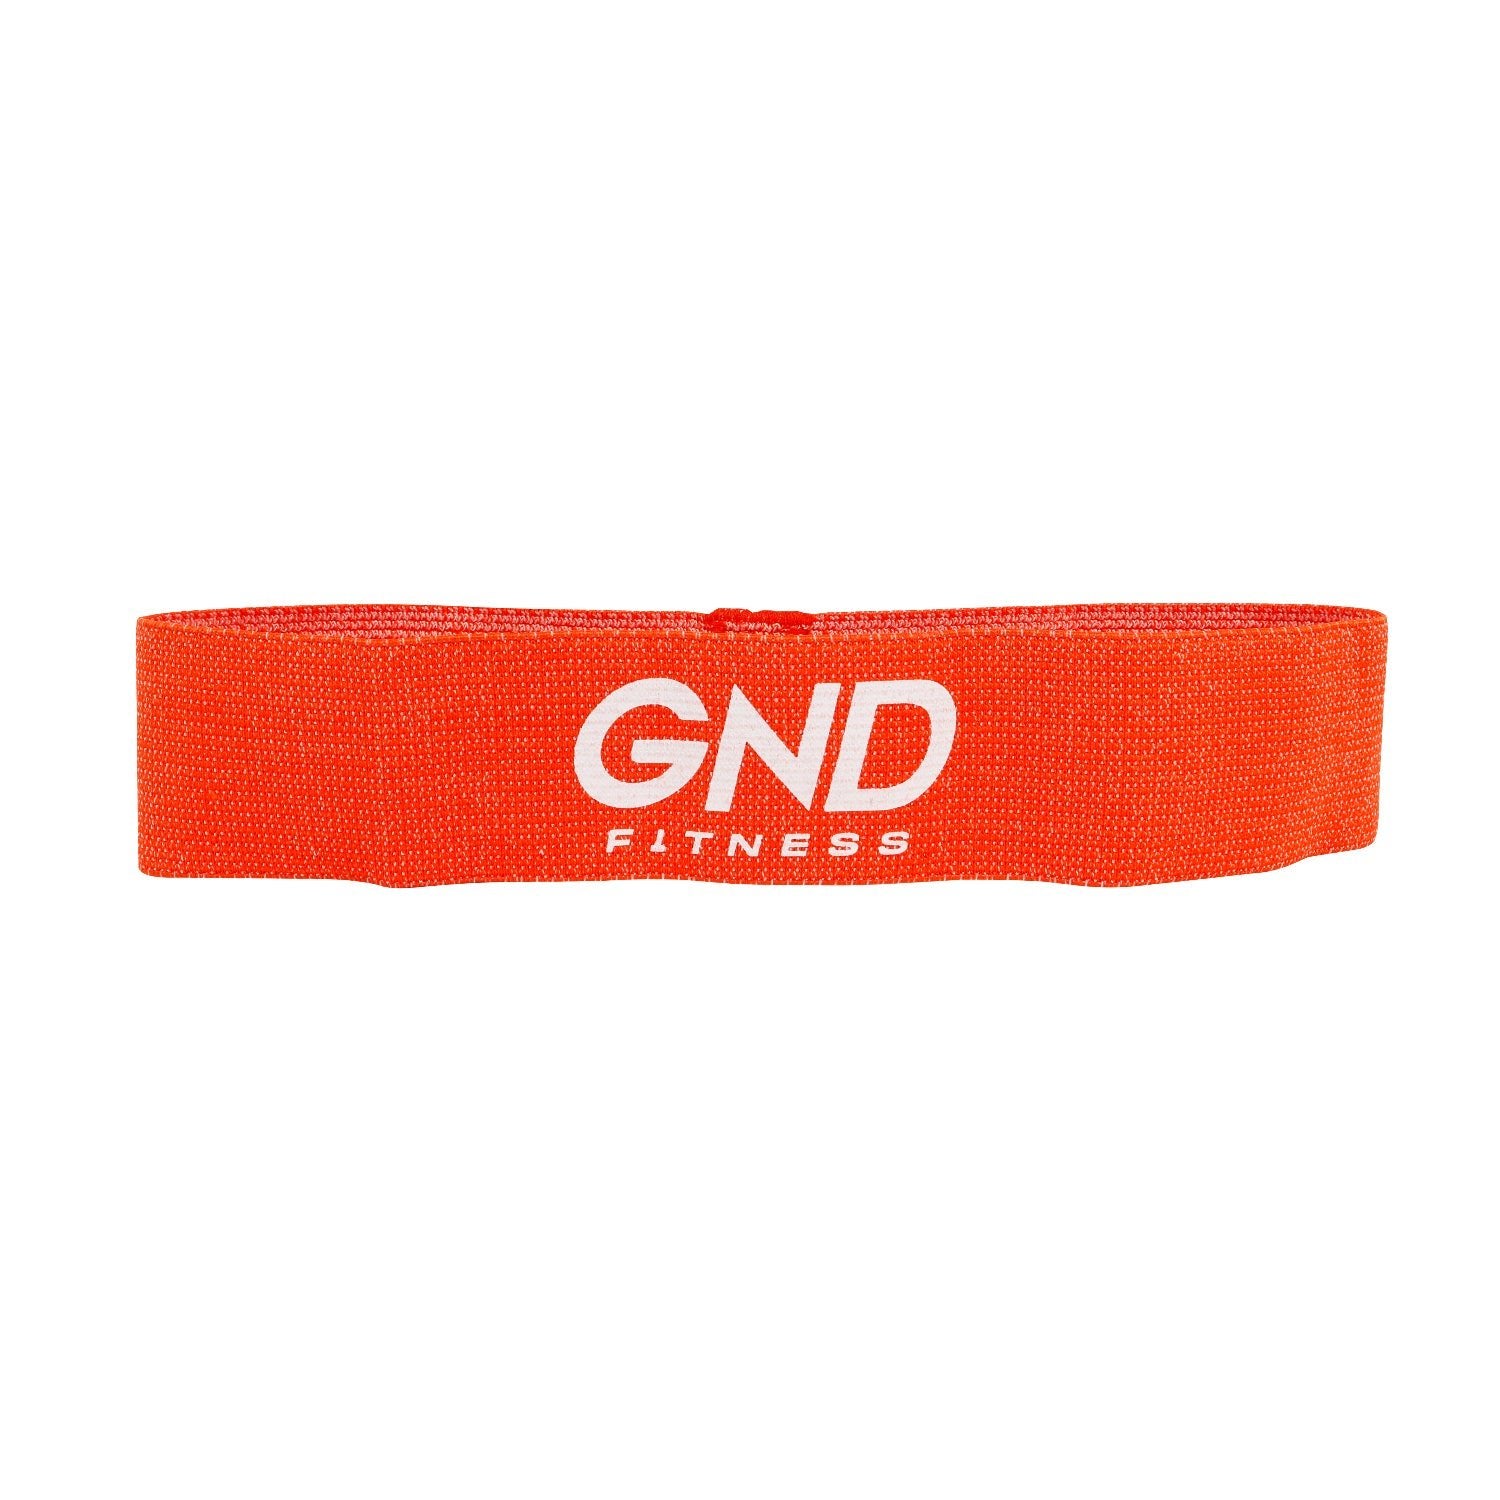 GND Booty Band Pack // 3 Bands - Booty Band- GND Fitness